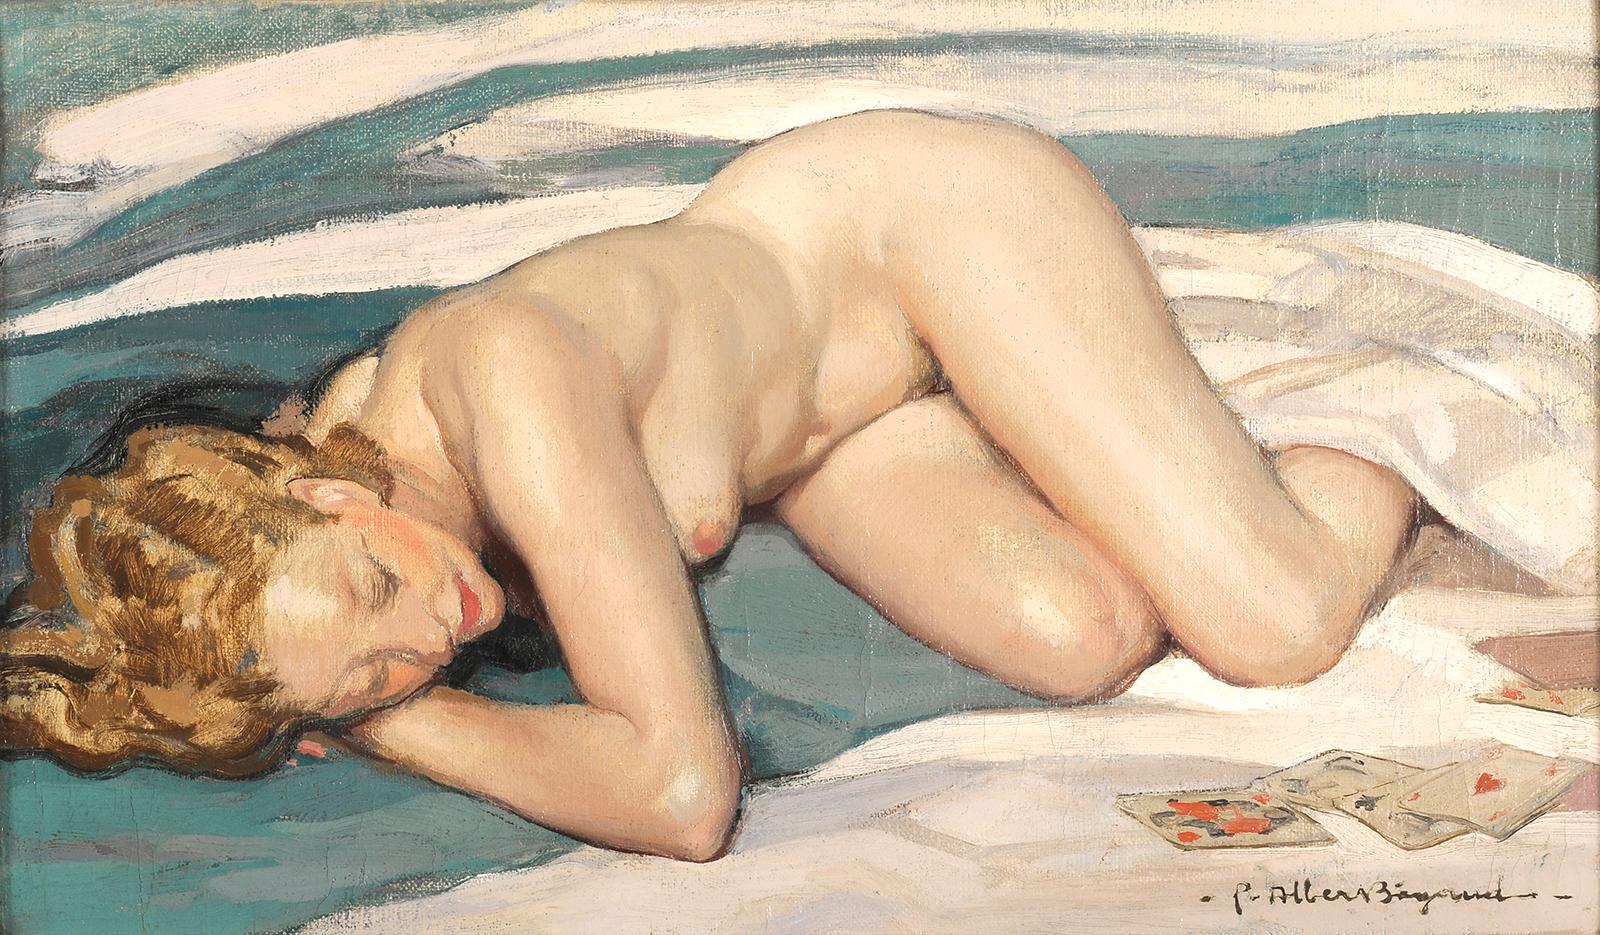 Pierre-Albert Bégaud Figurative Painting - End of card game - Portrait of a nude woman